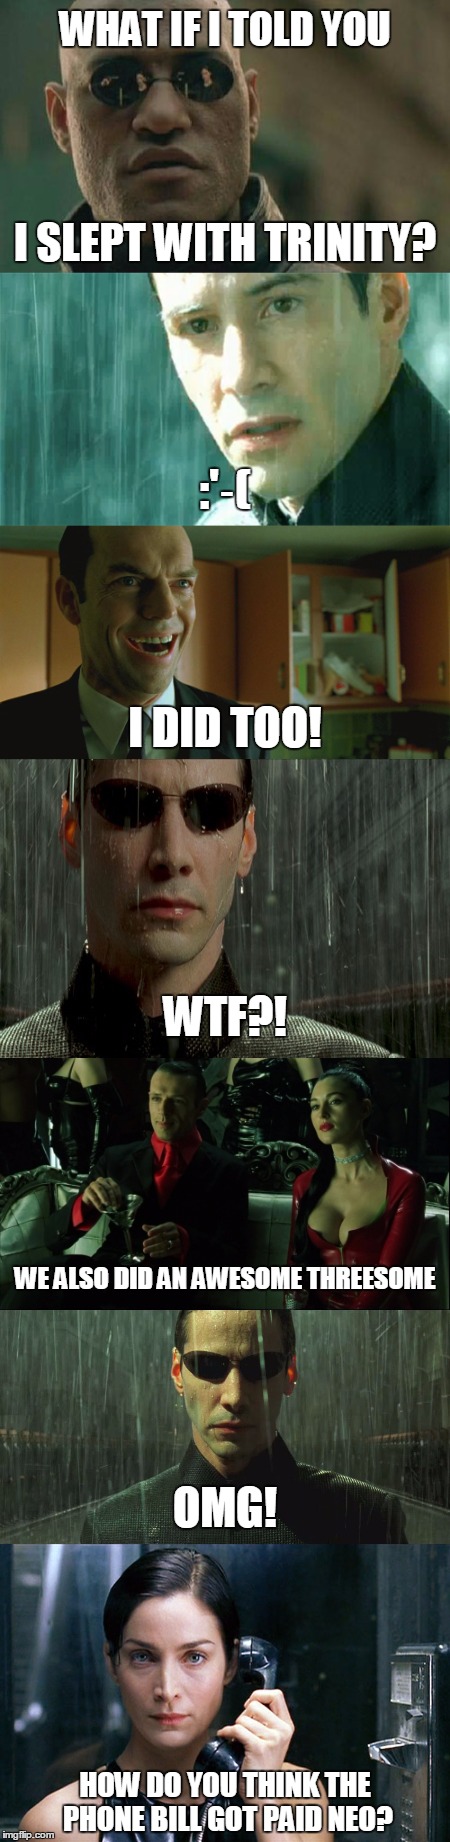 Poor Neo | WHAT IF I TOLD YOU; I SLEPT WITH TRINITY? :'‑(; I DID TOO! WTF?! WE ALSO DID AN AWESOME THREESOME; OMG! HOW DO YOU THINK THE PHONE BILL GOT PAID NEO? | image tagged in memes,neo,trinity,matrix morpheus,welcome to the matrix | made w/ Imgflip meme maker